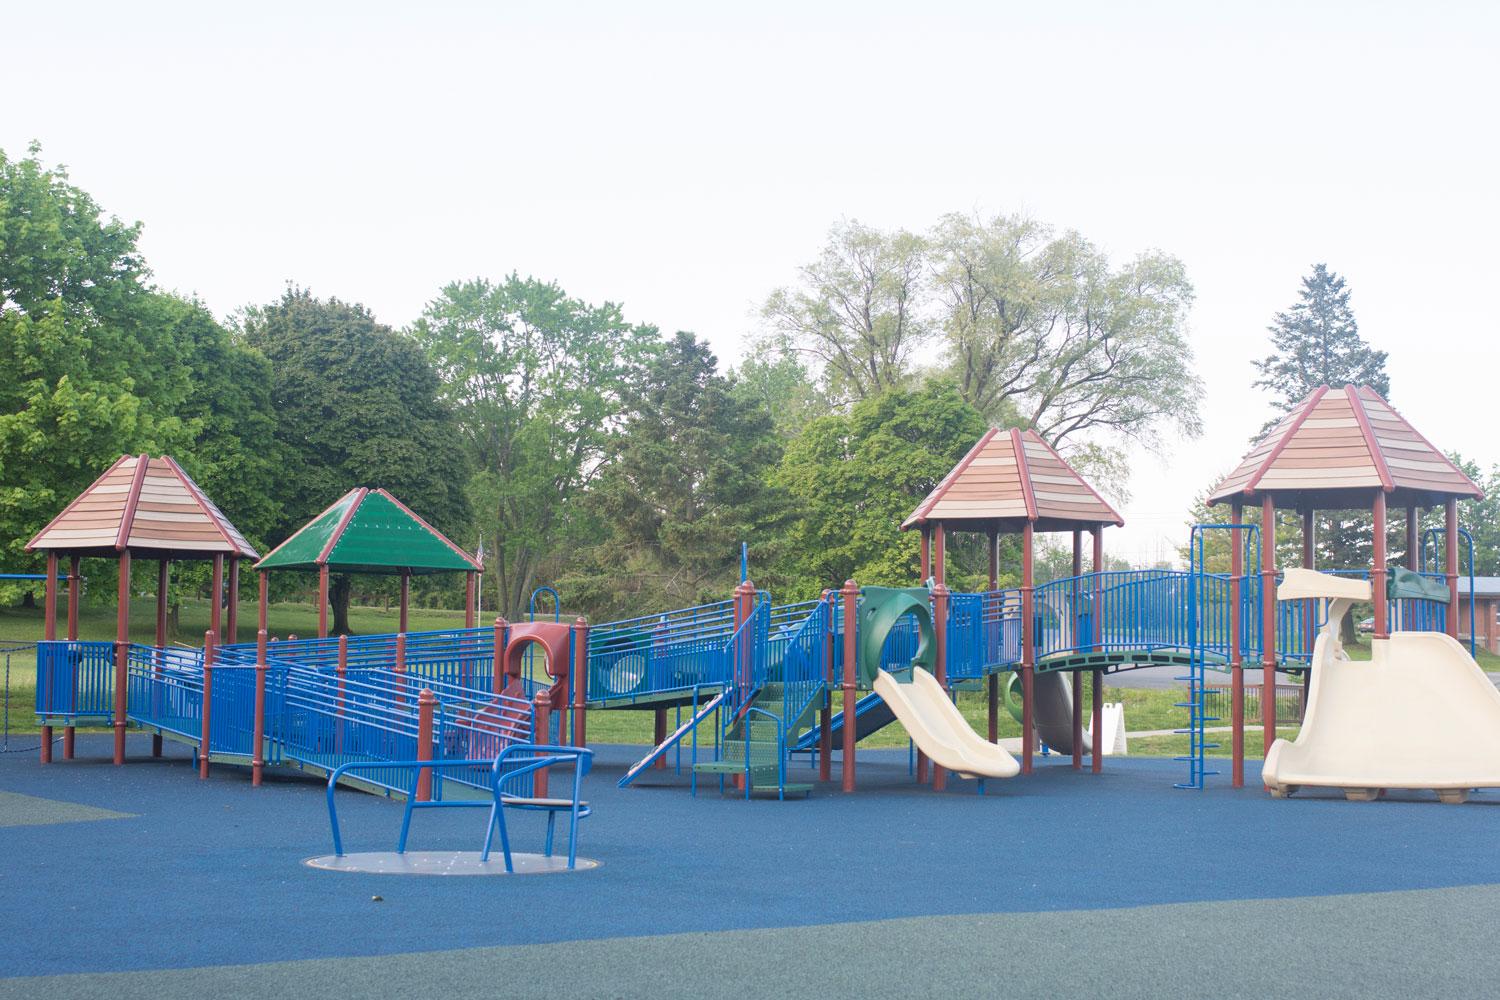 Playground: Large ramped structure